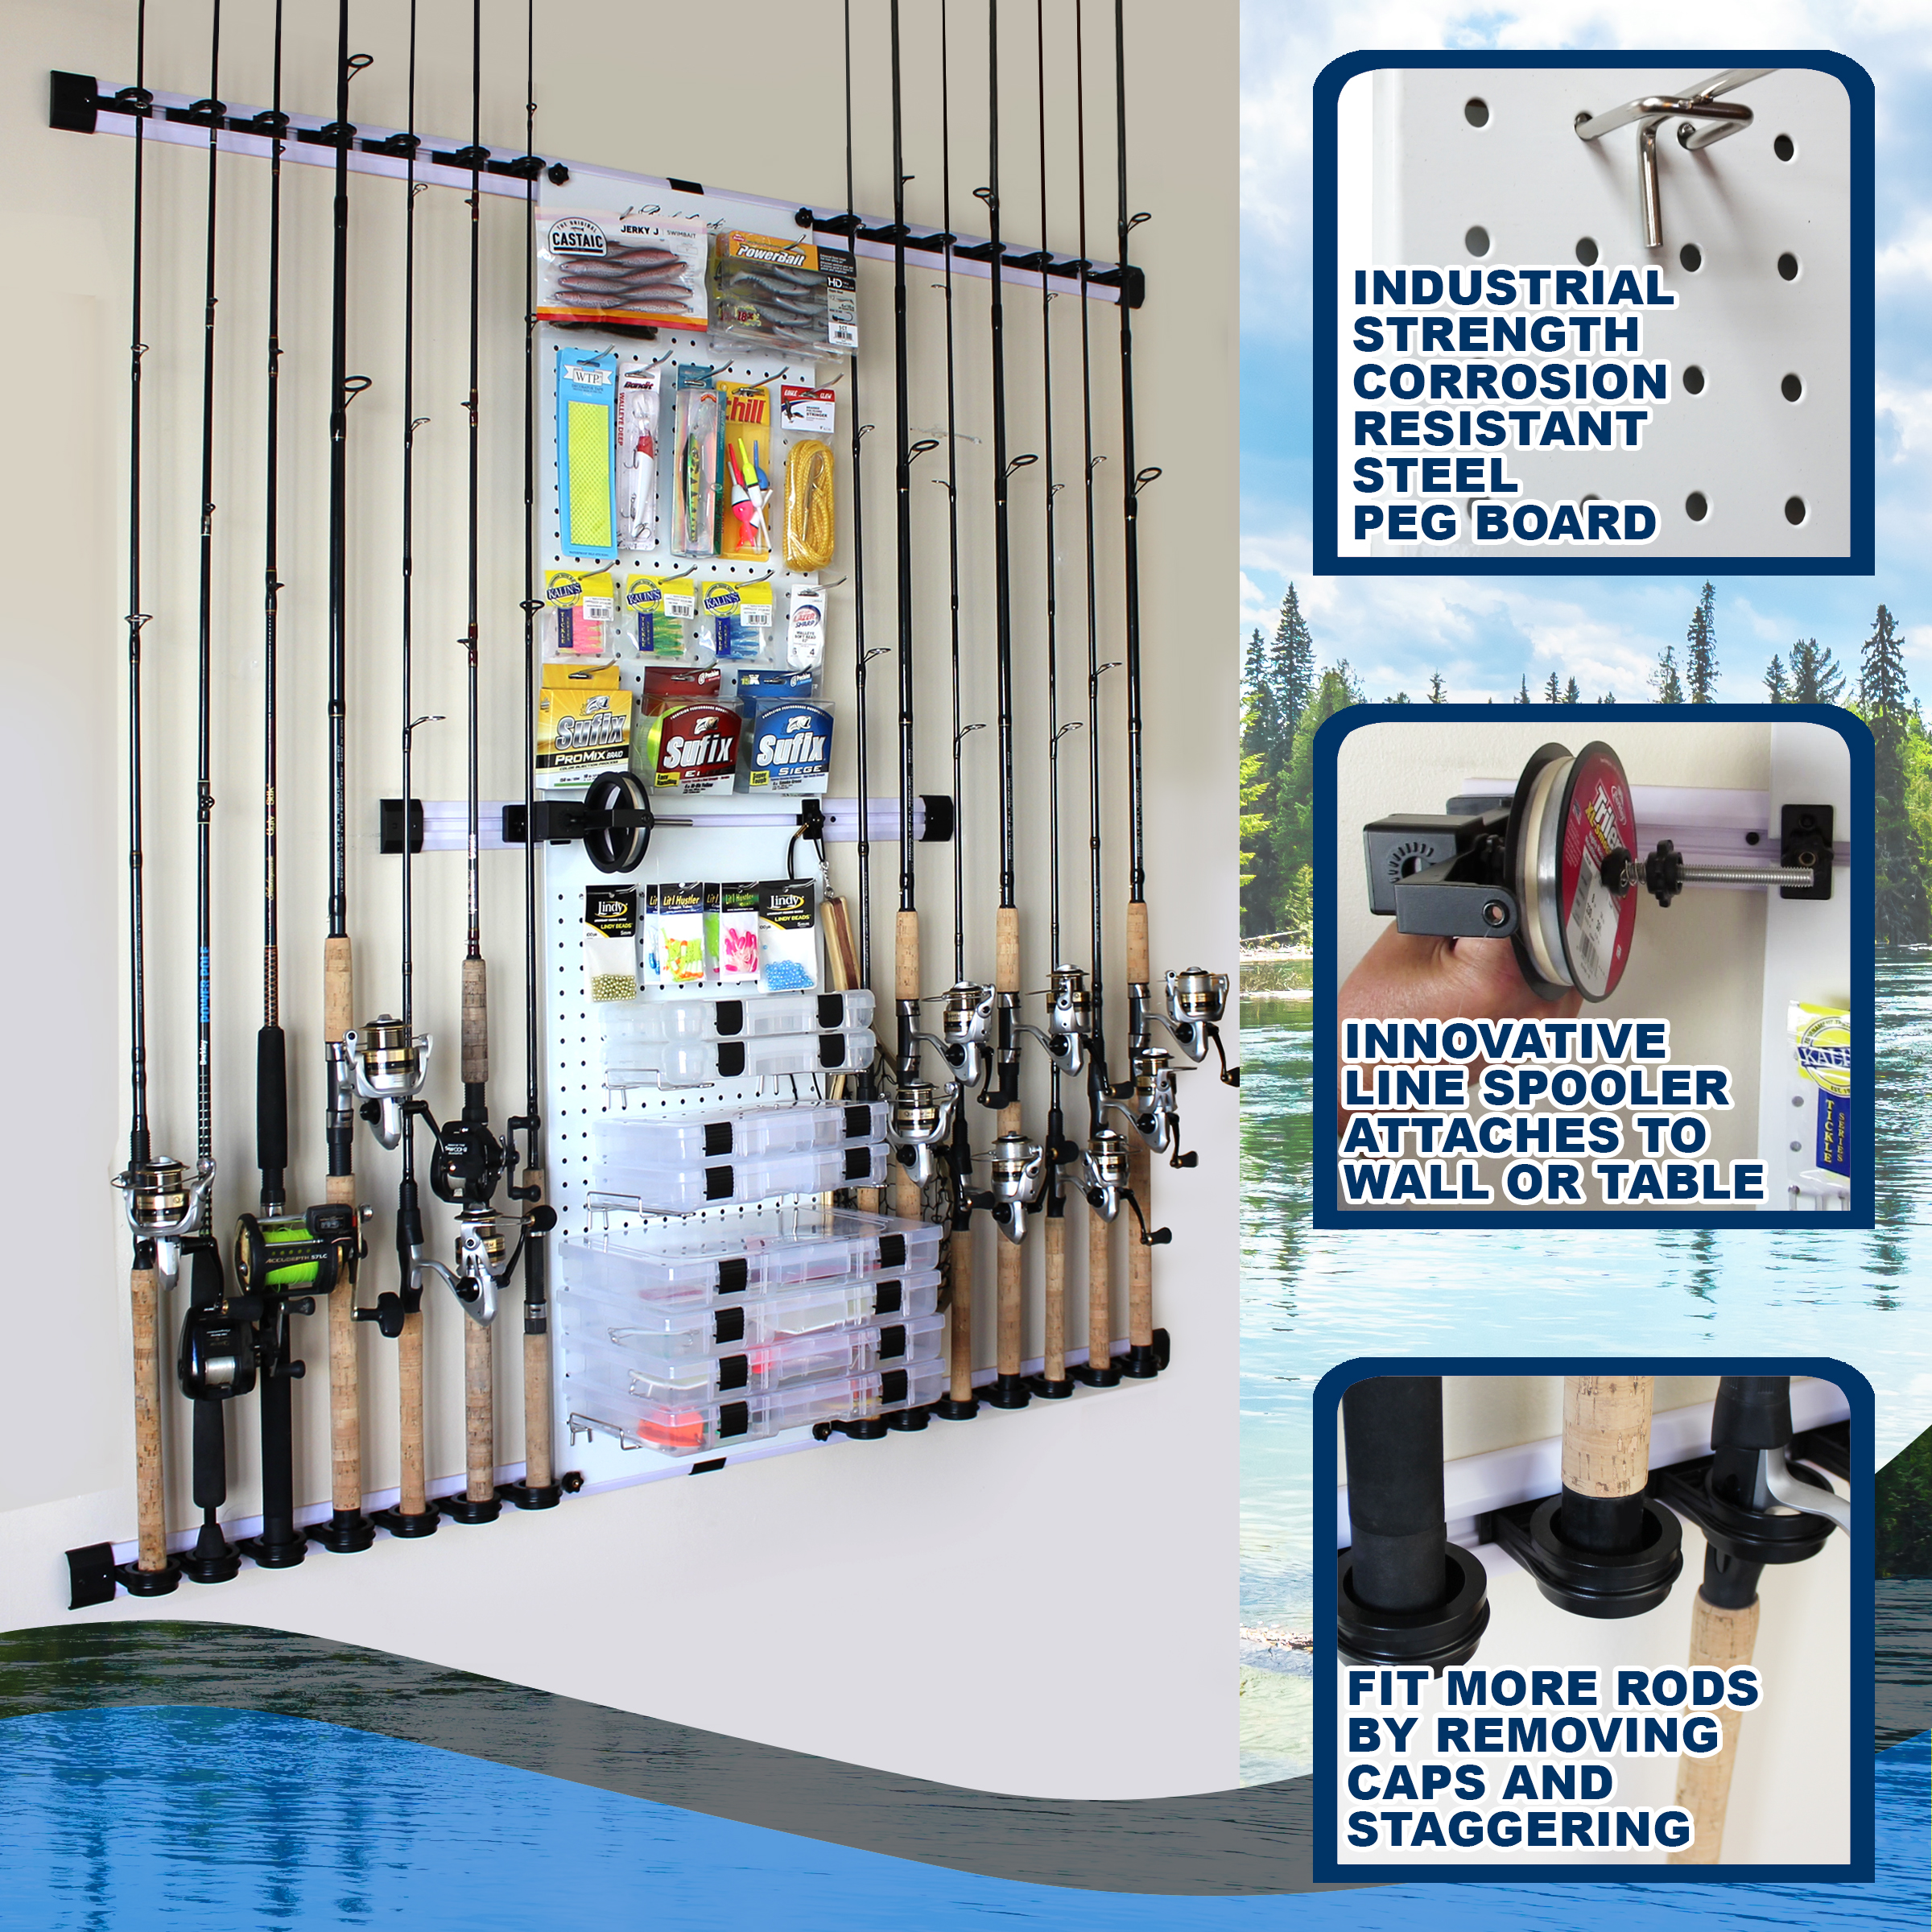 Fishing Pole Holders for Garage Wall Hanging-2 Pack Vertical Fishing Rod  Holders for Garage Wall Mount,Holds Up to 12 Rods,Fishing Gifts for Men